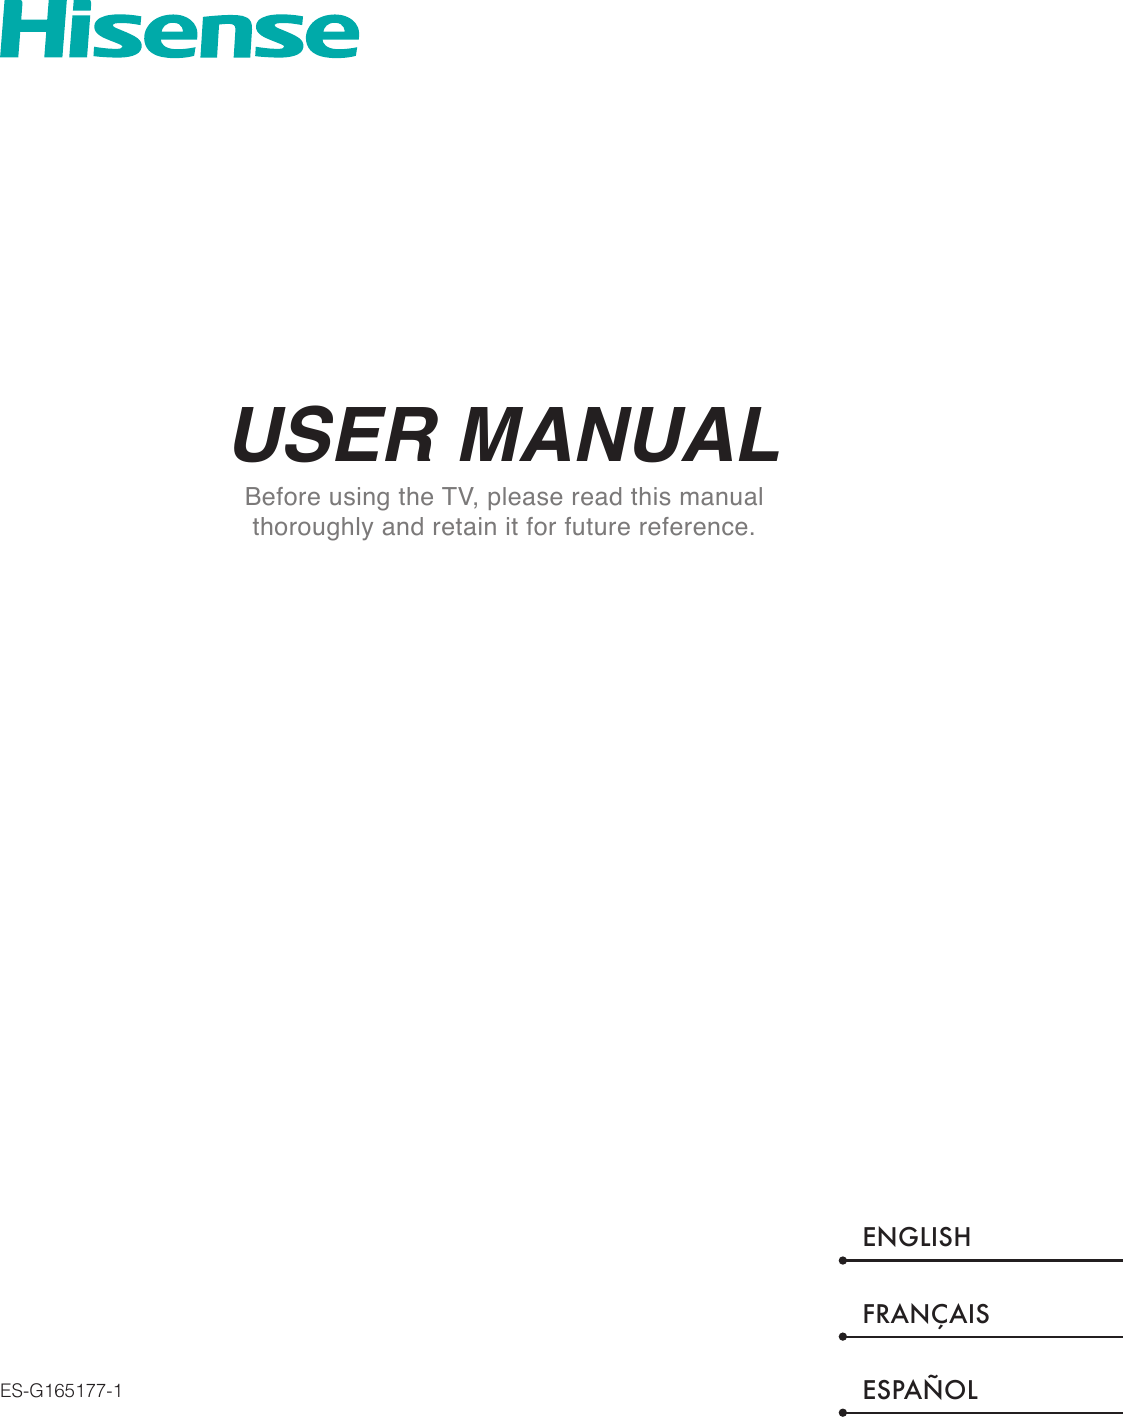 USER MANUALBefore using the TV, please read this manual thoroughly and retain it for future reference.ENGLISHFRANÇAISESPAÑOLES-G165177-1